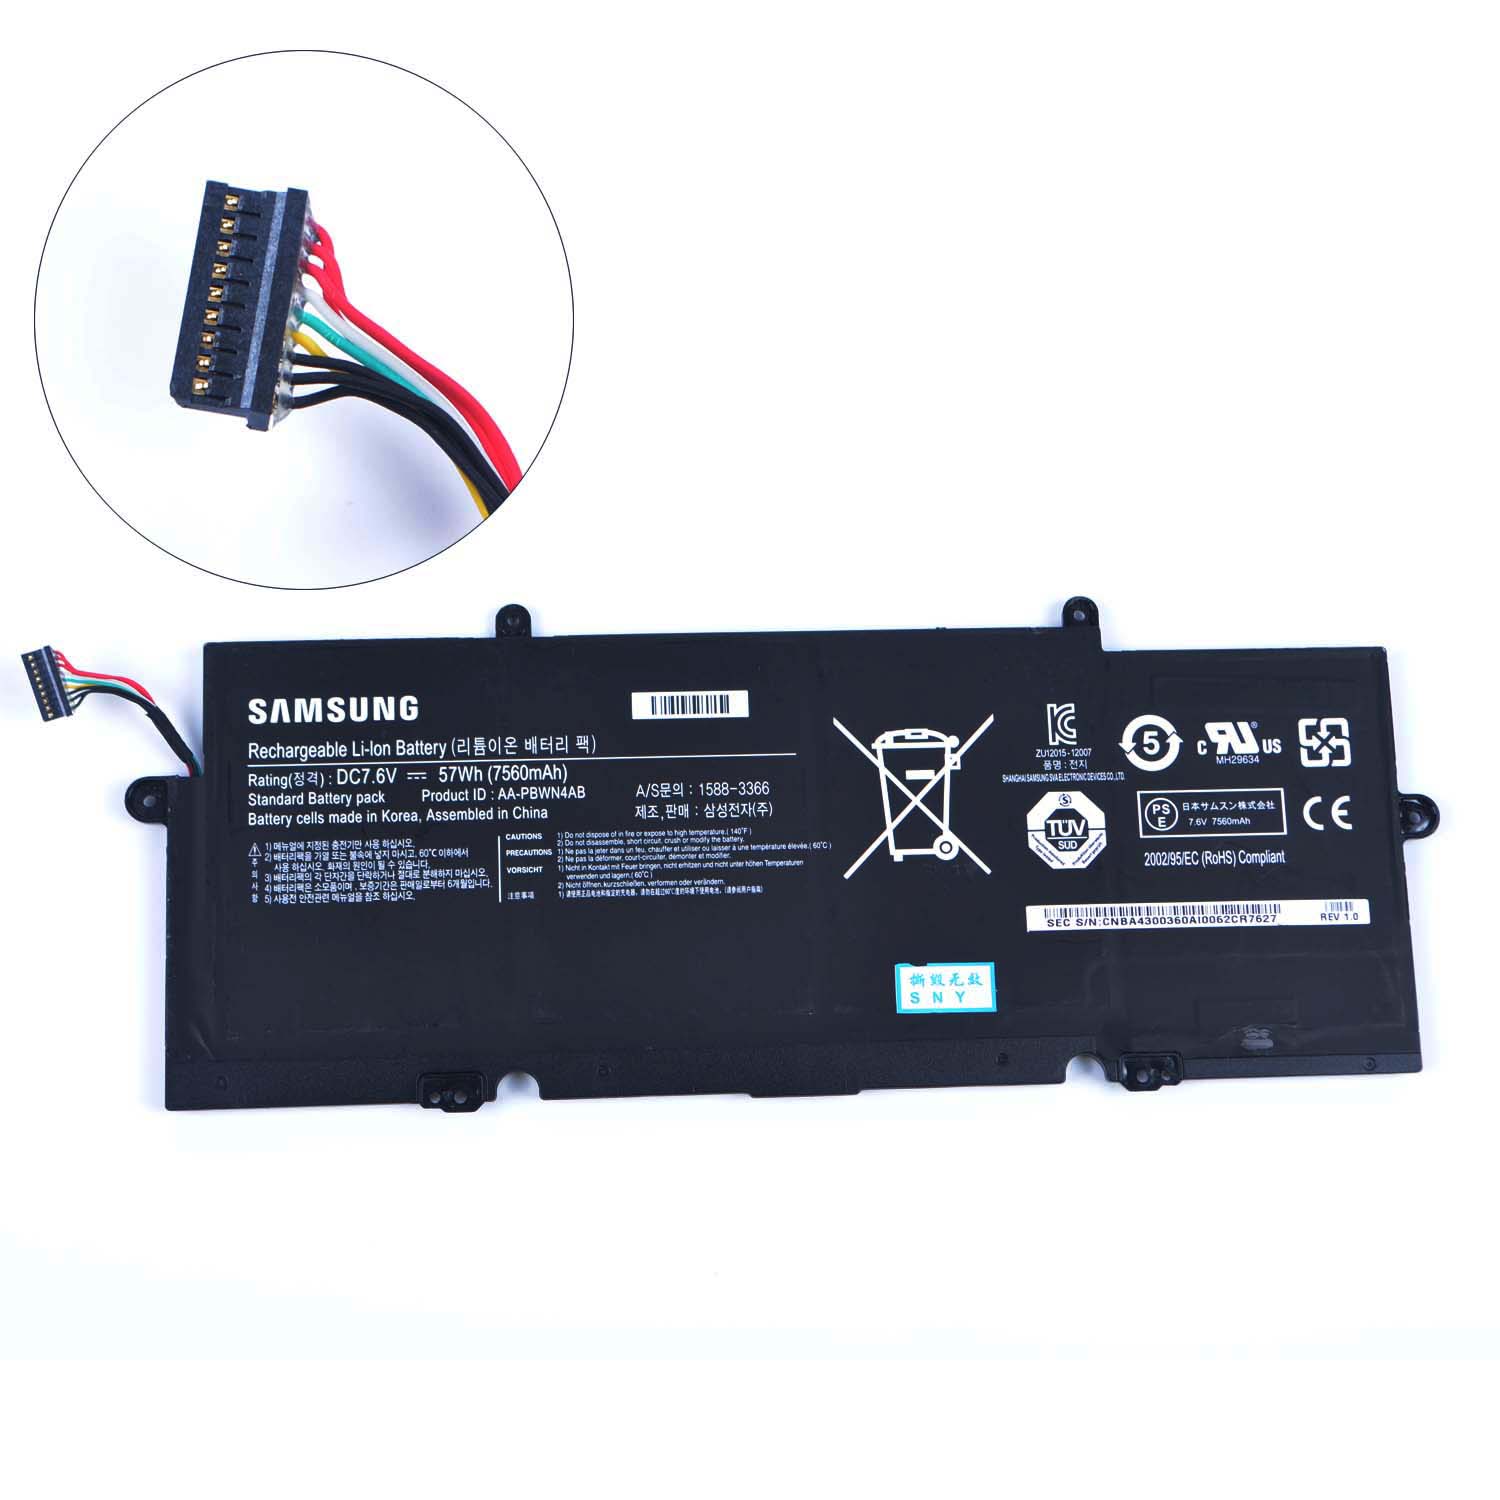 Replacement Battery for Samsung Samsung 730U3E-A01 battery